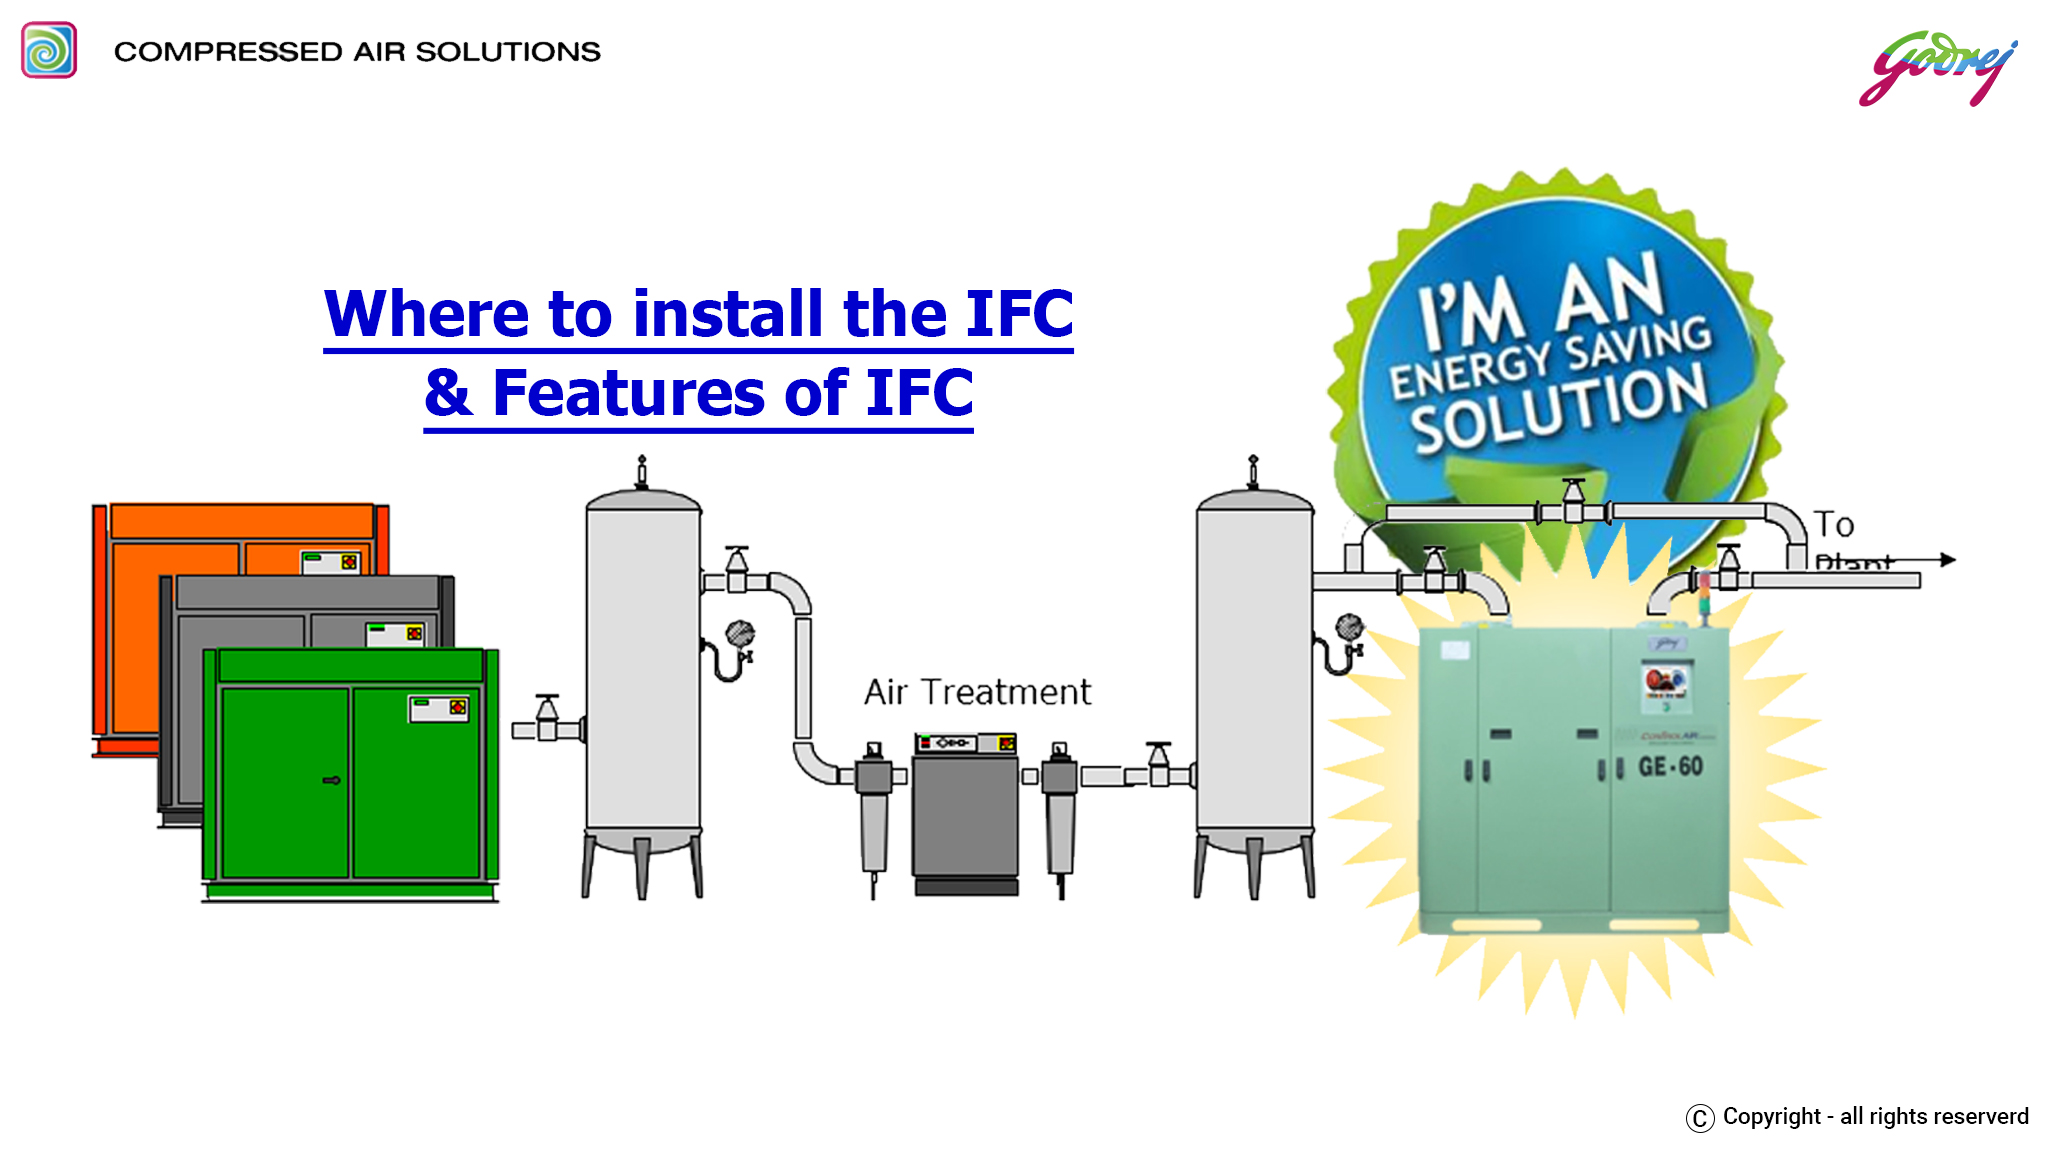 where-to-install-IFC-ENERGY SAVING SOLUTIONS IN COMPRESSED AIR NETWORK (GODREJ)